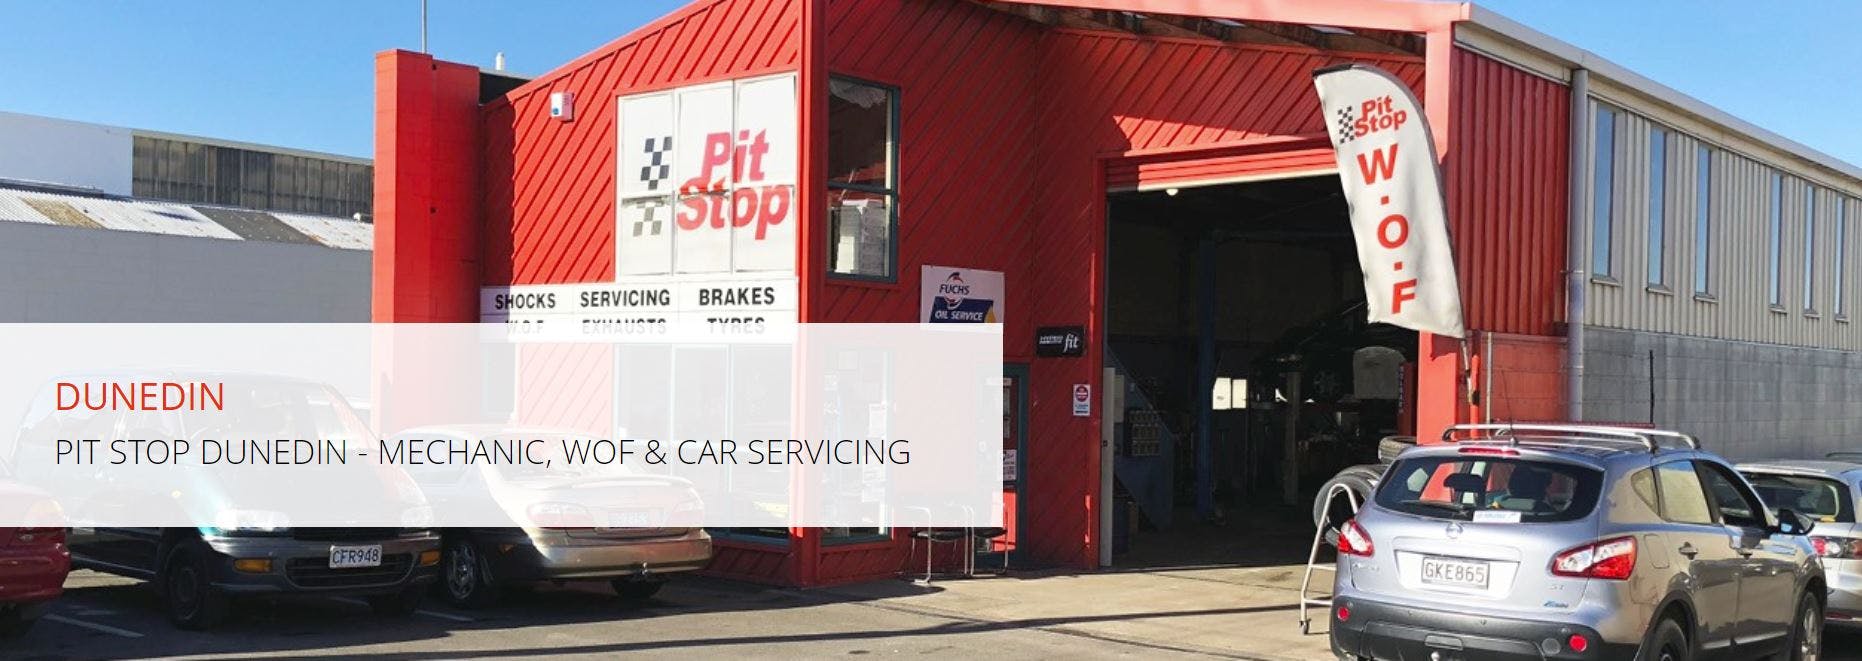 pitstop-building-front-1587624555